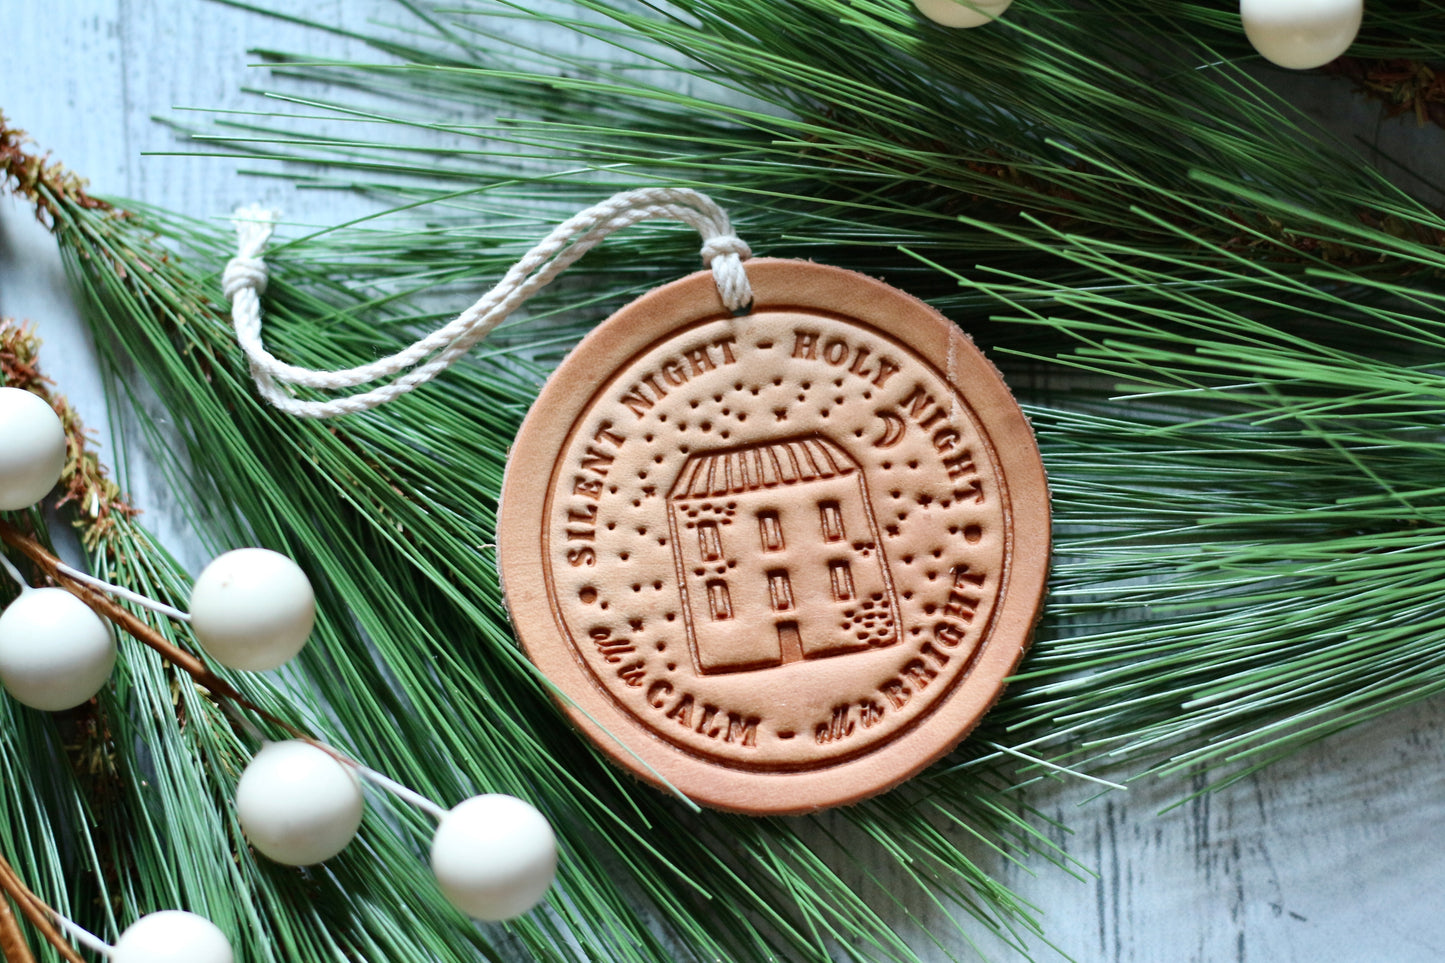 silent night holy night - leather hand-stamped ornament